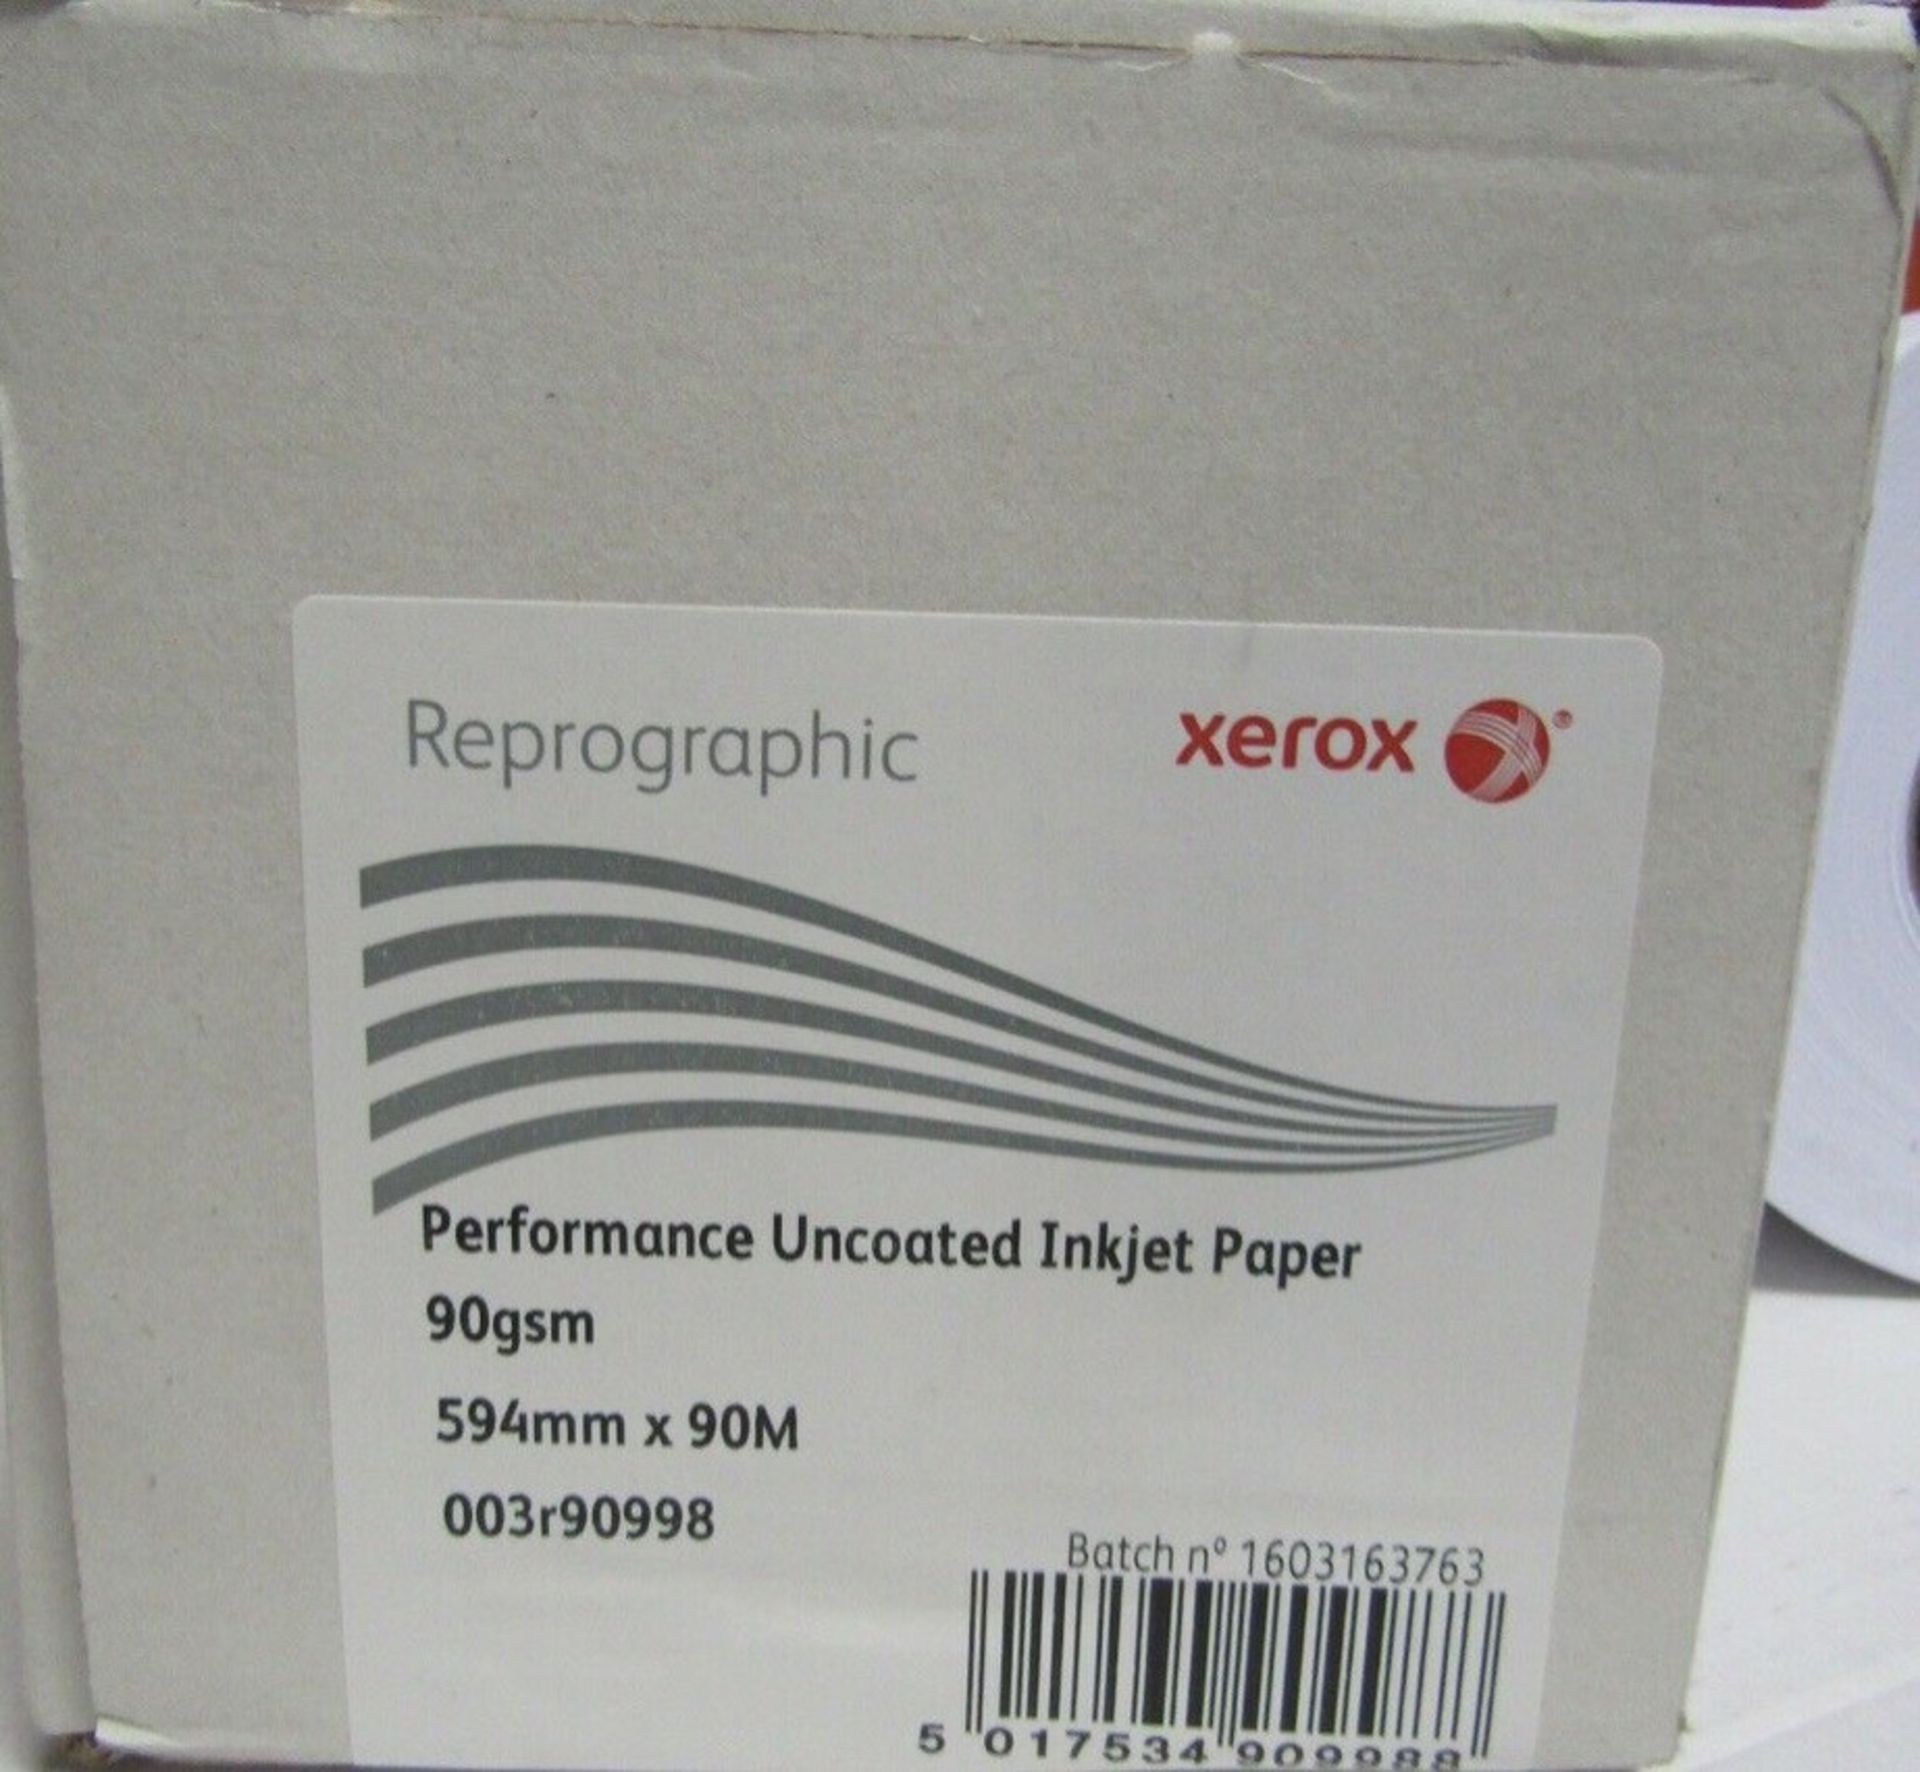 Xerox Performance Uncoated Inkjet Paper FSC CAD 594mm x 90m 90gsm - Image 3 of 3